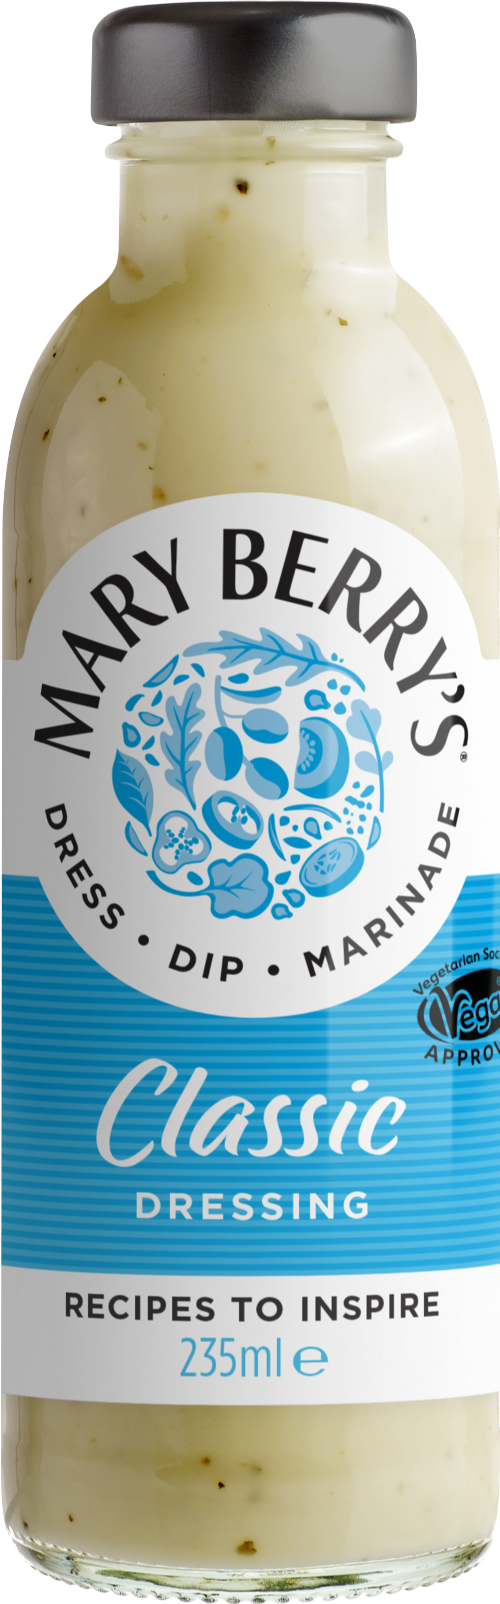 MARY BERRY'S Salad Dressing 235ml